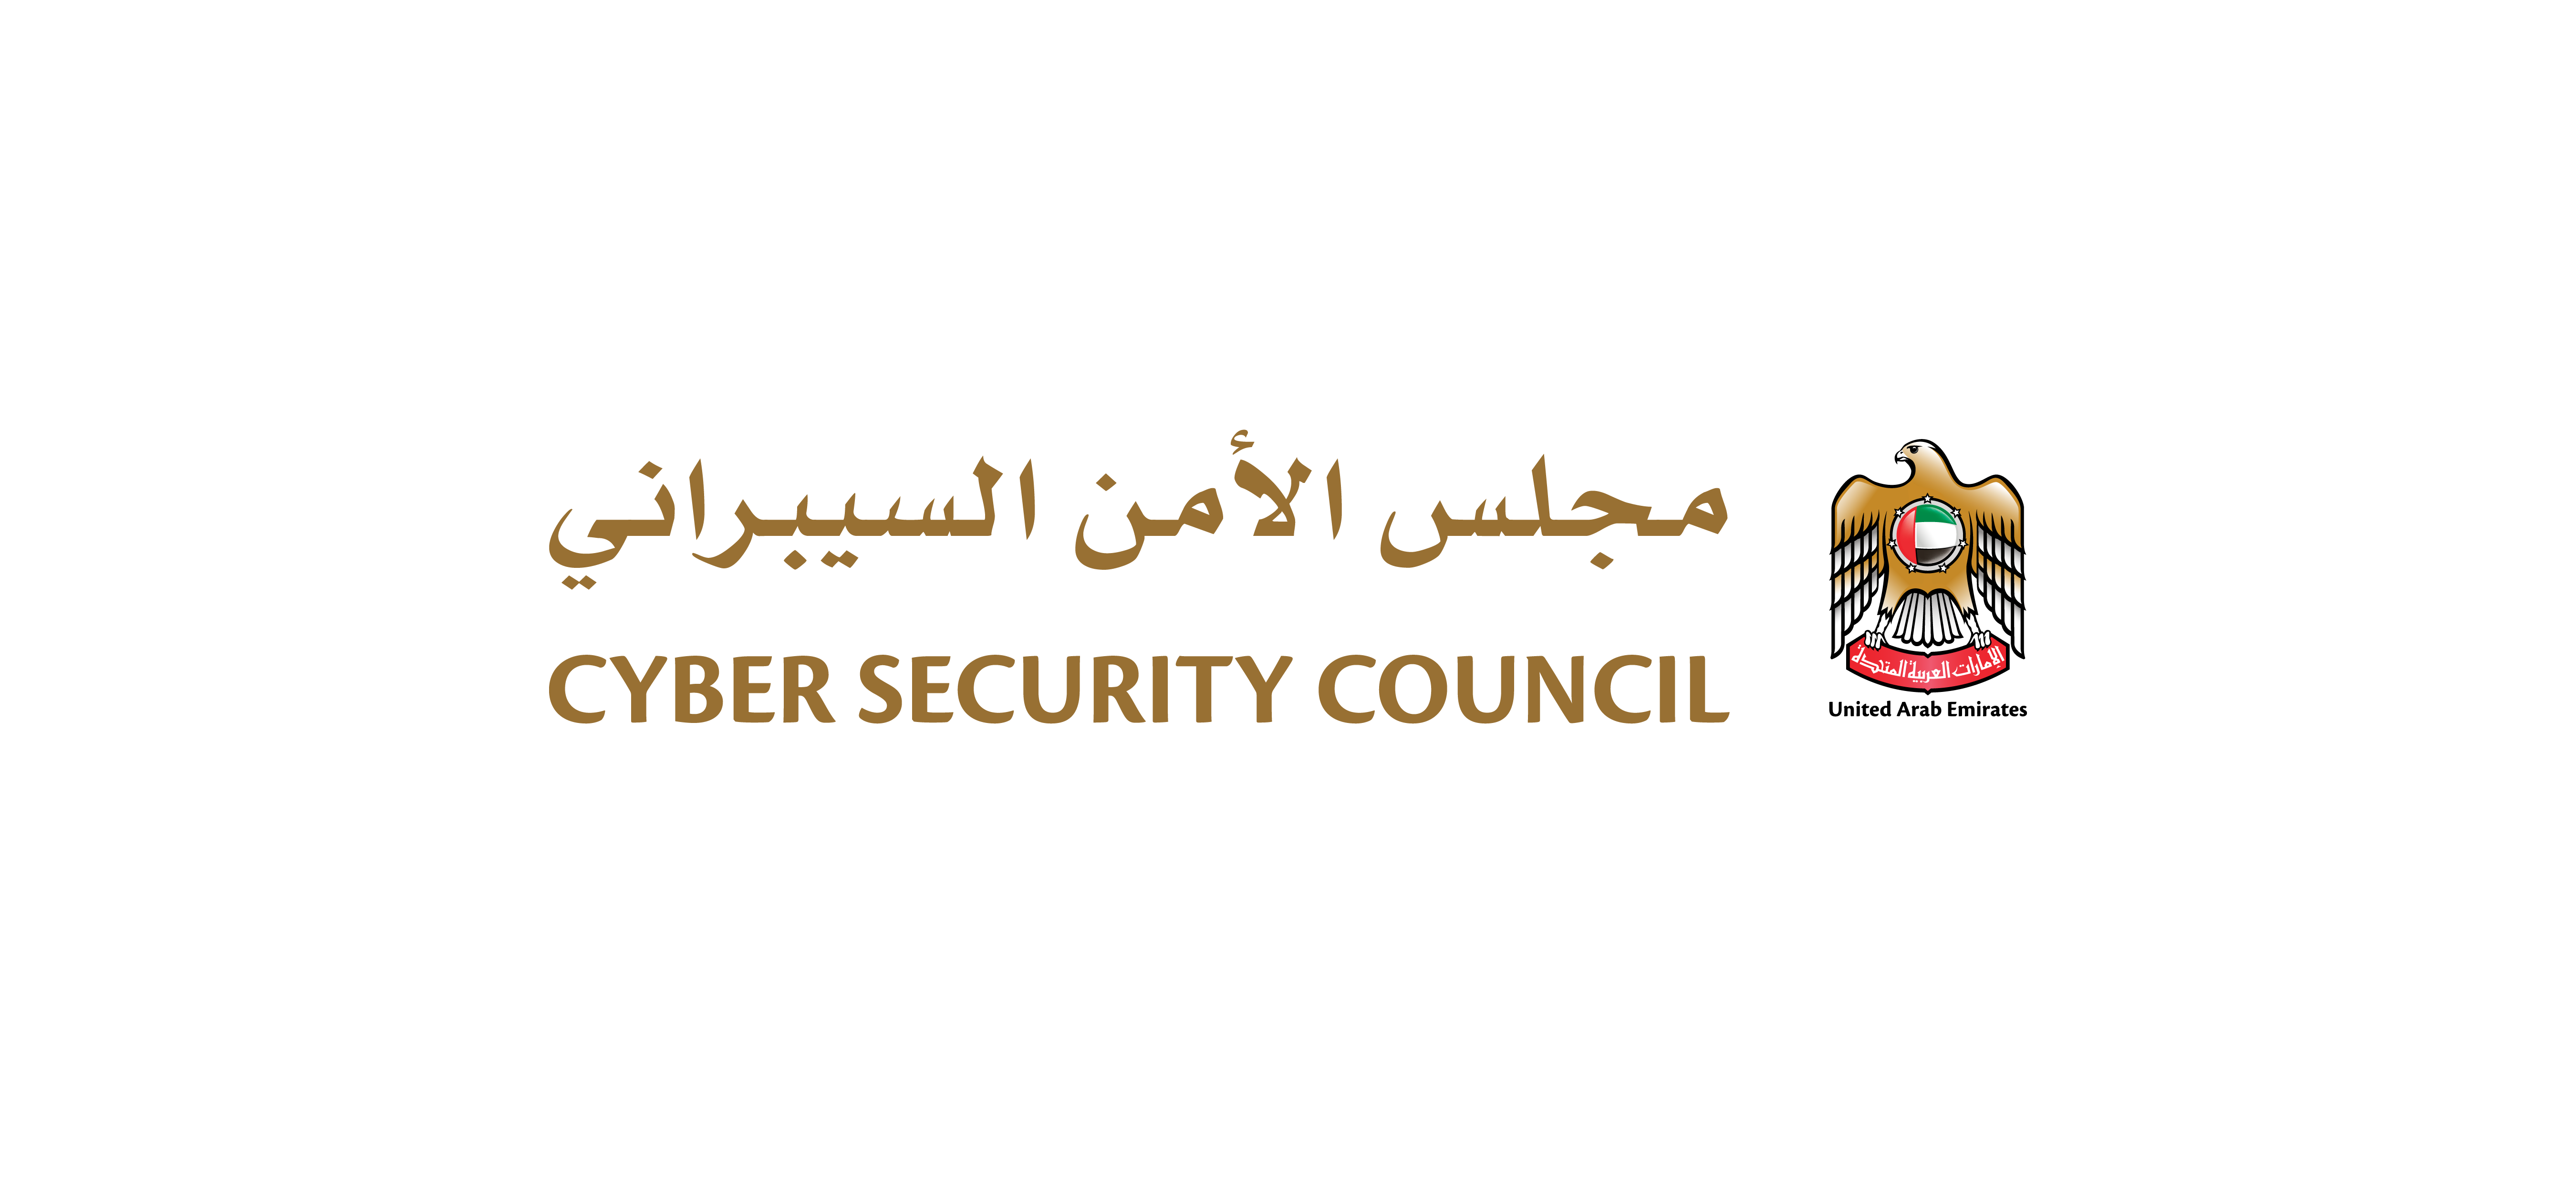 UAE Cyber Security Council Leads Quality Initiatives To Improve Digital Security